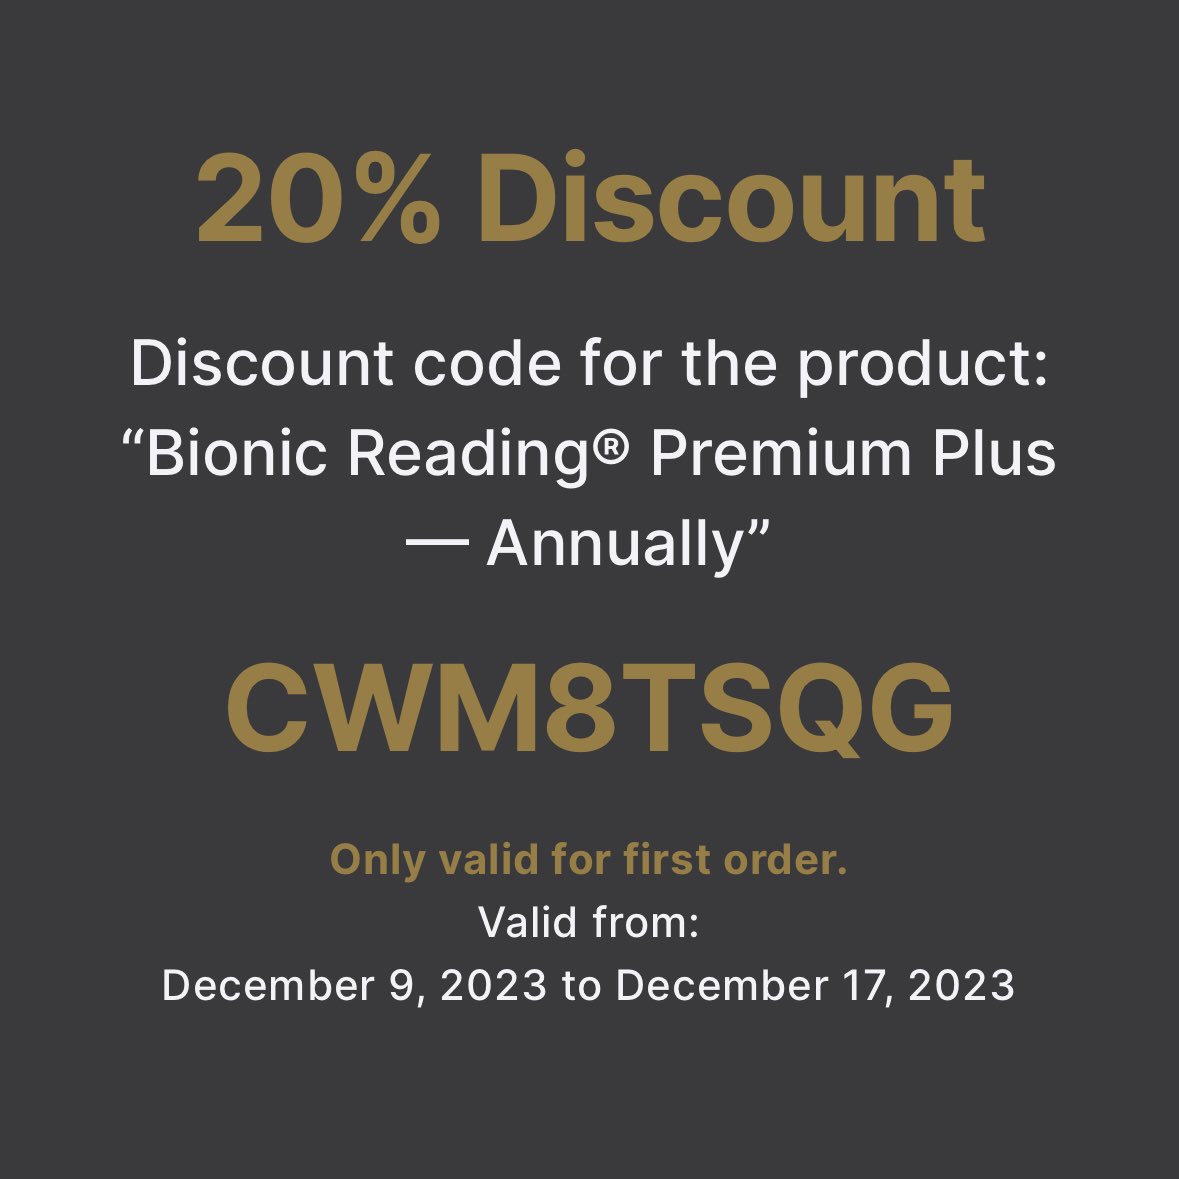 🔥20% Discount🔥 Discount for the product: “Bionic Reading® Premium Plus — Annually”. Your Discount Code: 👉CWM8TSQG More information: 👉bionic-reading.com/br-discount/ — 𝗕𝗶𝗼𝗇𝗂𝖼 𝗥𝗲𝗮𝗱𝗂𝗇𝗀® 𝗚𝗼𝗅𝖽 𝗮𝘄𝗮𝗋𝖽-𝘄𝗶𝗻𝗻𝗂𝗇𝗀 𝗿𝗲𝗮𝗱𝗂𝗇𝗀 𝗺𝗲𝘁𝗁𝗈𝖽. 𝗠𝗮𝖽𝖾 𝗶𝗇🇨🇭 —